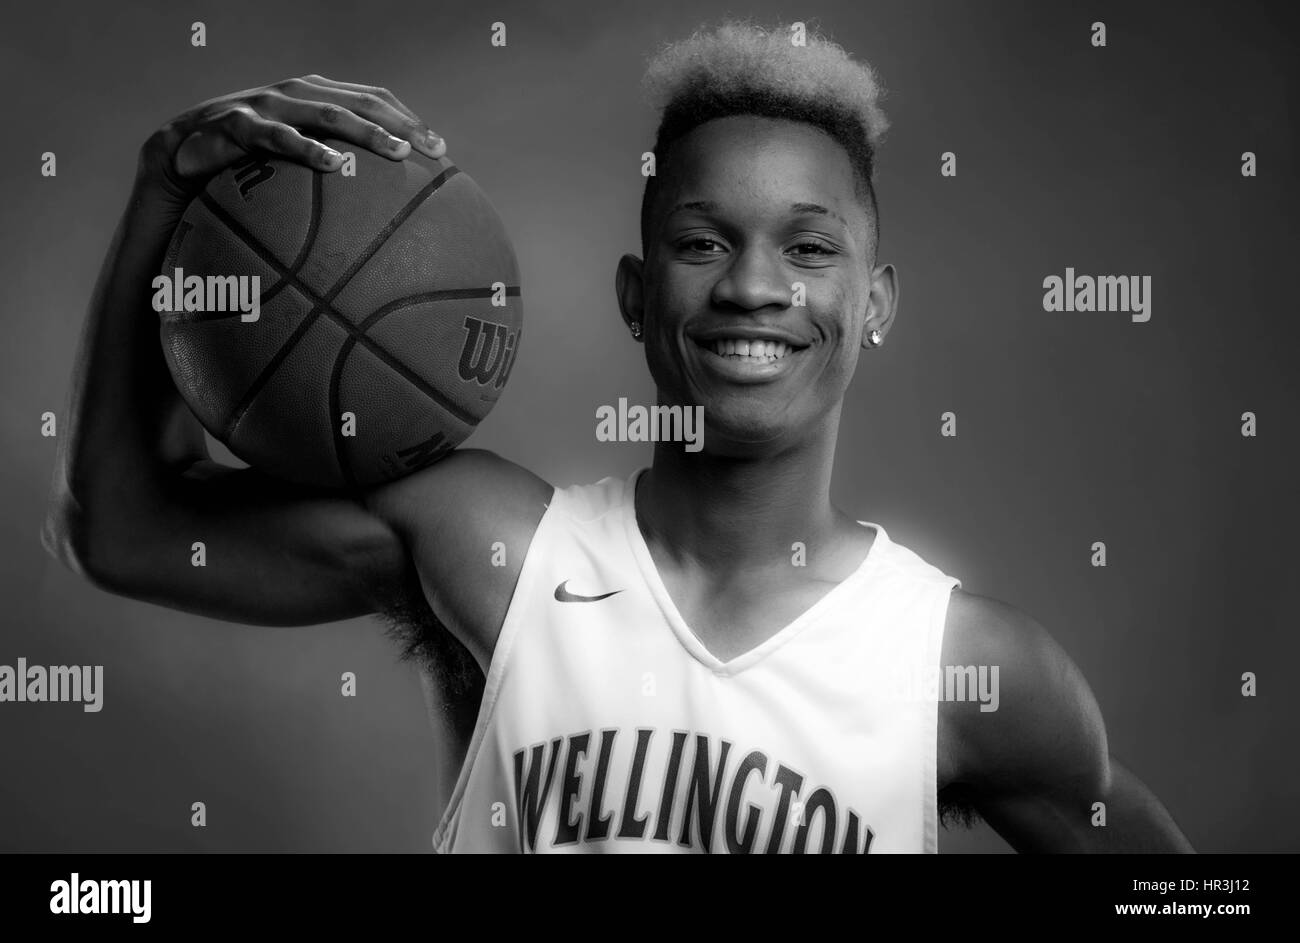 West Palm Beach, Florida, USA. 26th Feb, 2017. Wellington High School guard Trent Frazier is The Palm Beach Post basketball player of the year for large schools. Credit: Allen Eyestone/The Palm Beach Post/ZUMA Wire/Alamy Live News Stock Photo